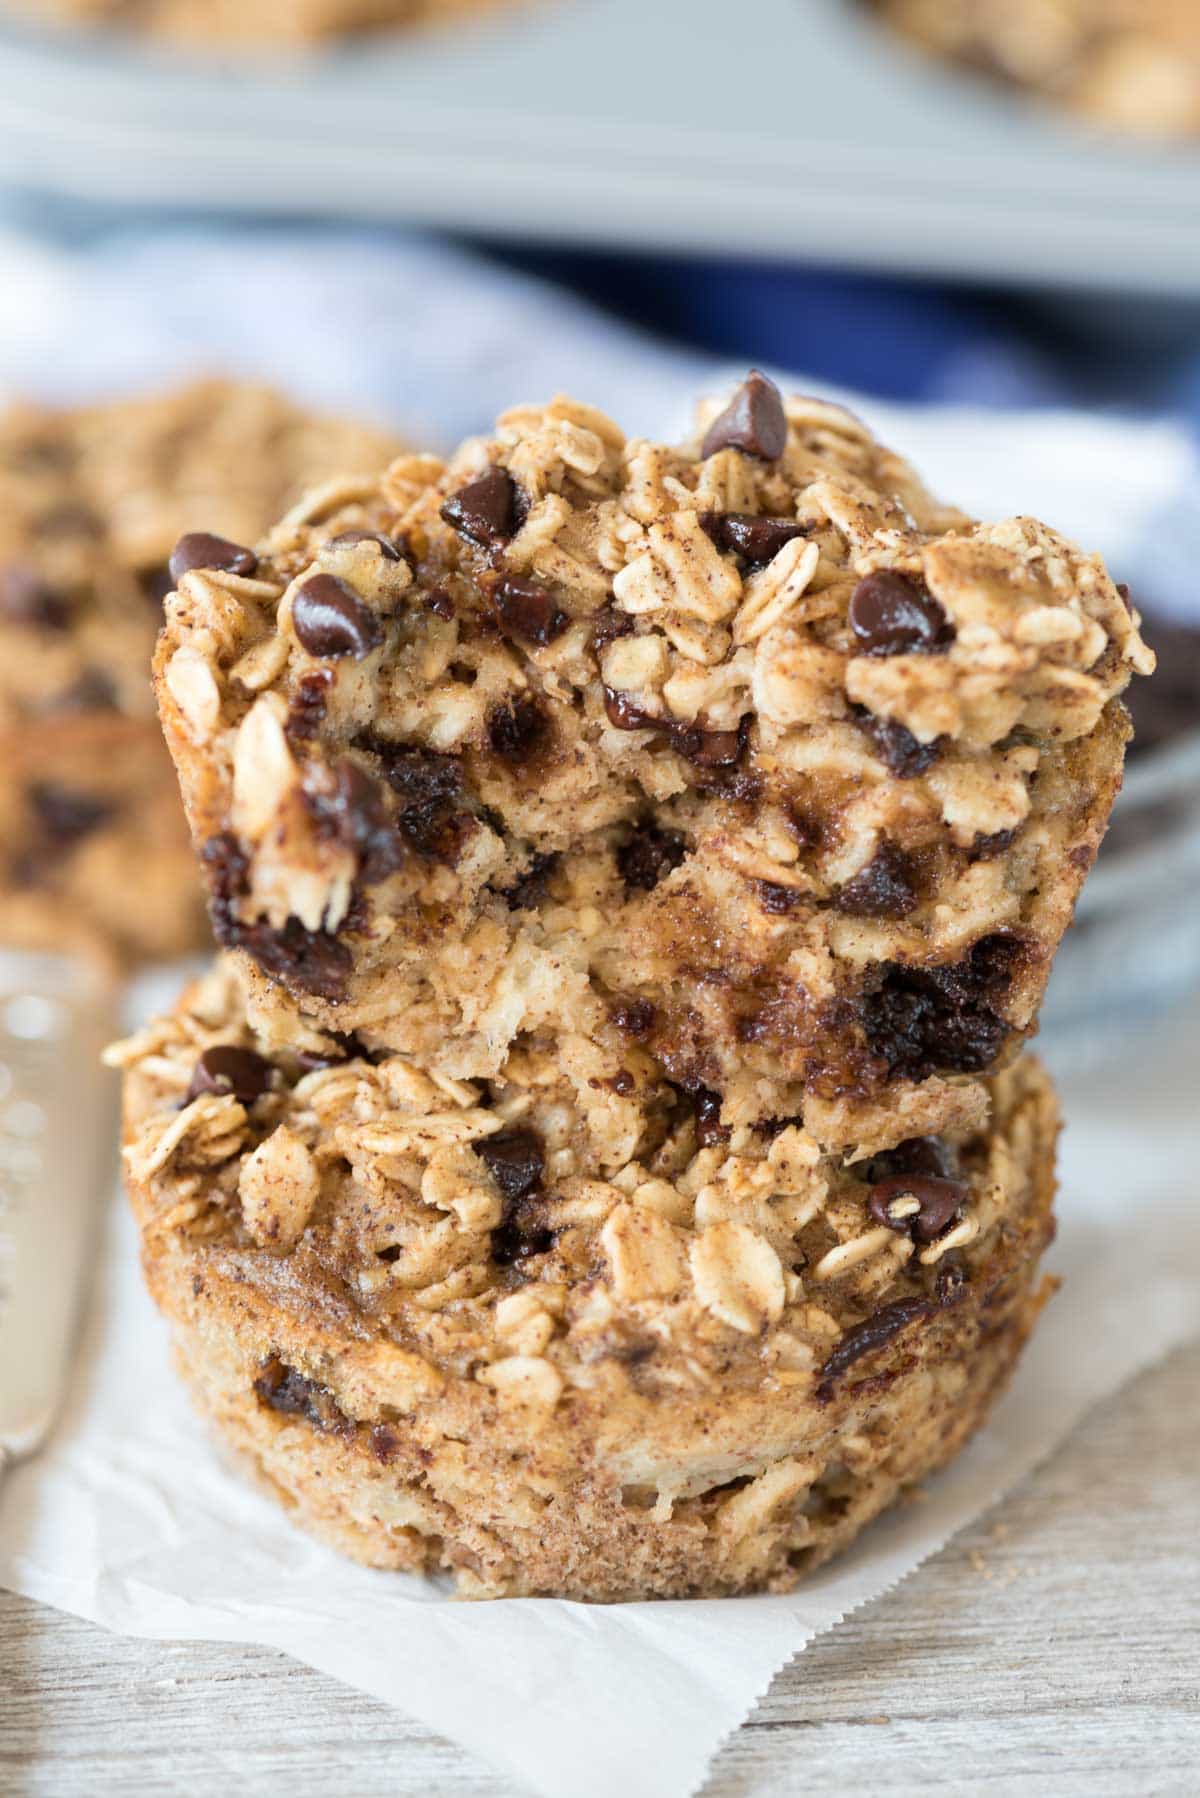 Chocolate Chip Baked Oatmeal Muffins - this EASY breakfast recipe is great for on the go! It's a healthier muffin that's dairy free and has no oil or flour but tastes like an amazing chocolate chip dessert!